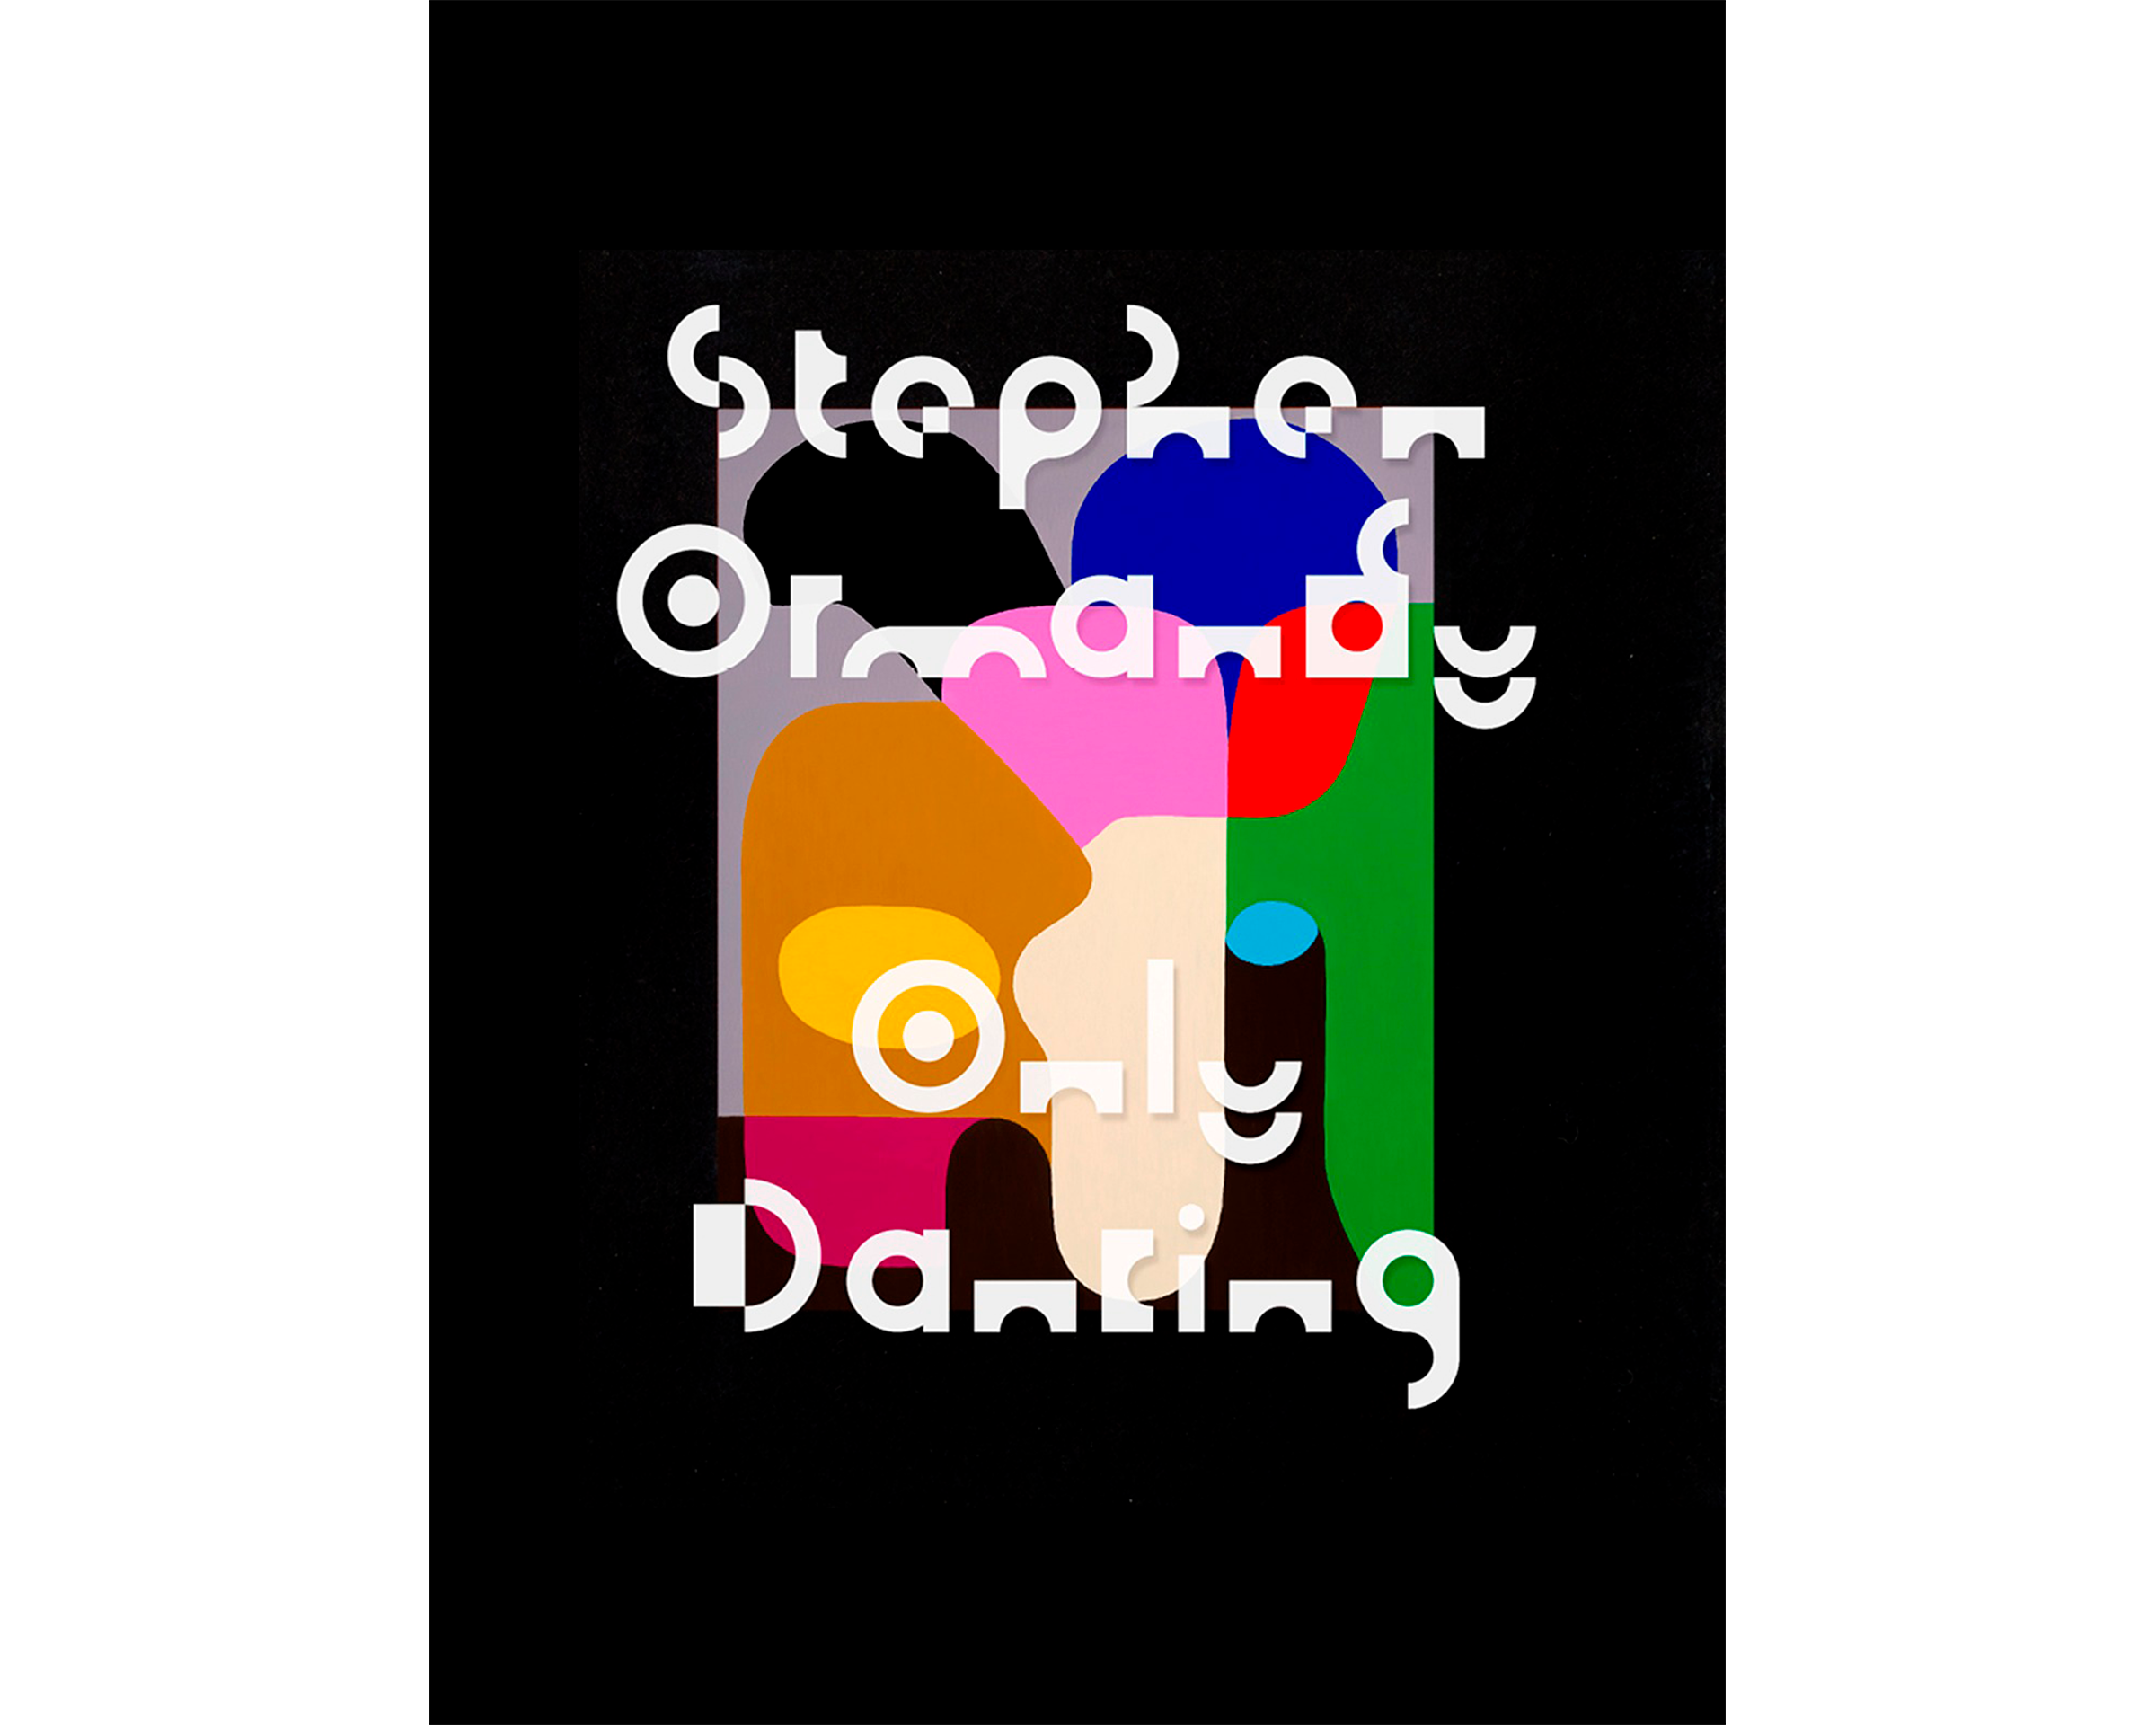 Stephen Ormandy: Only Dancing